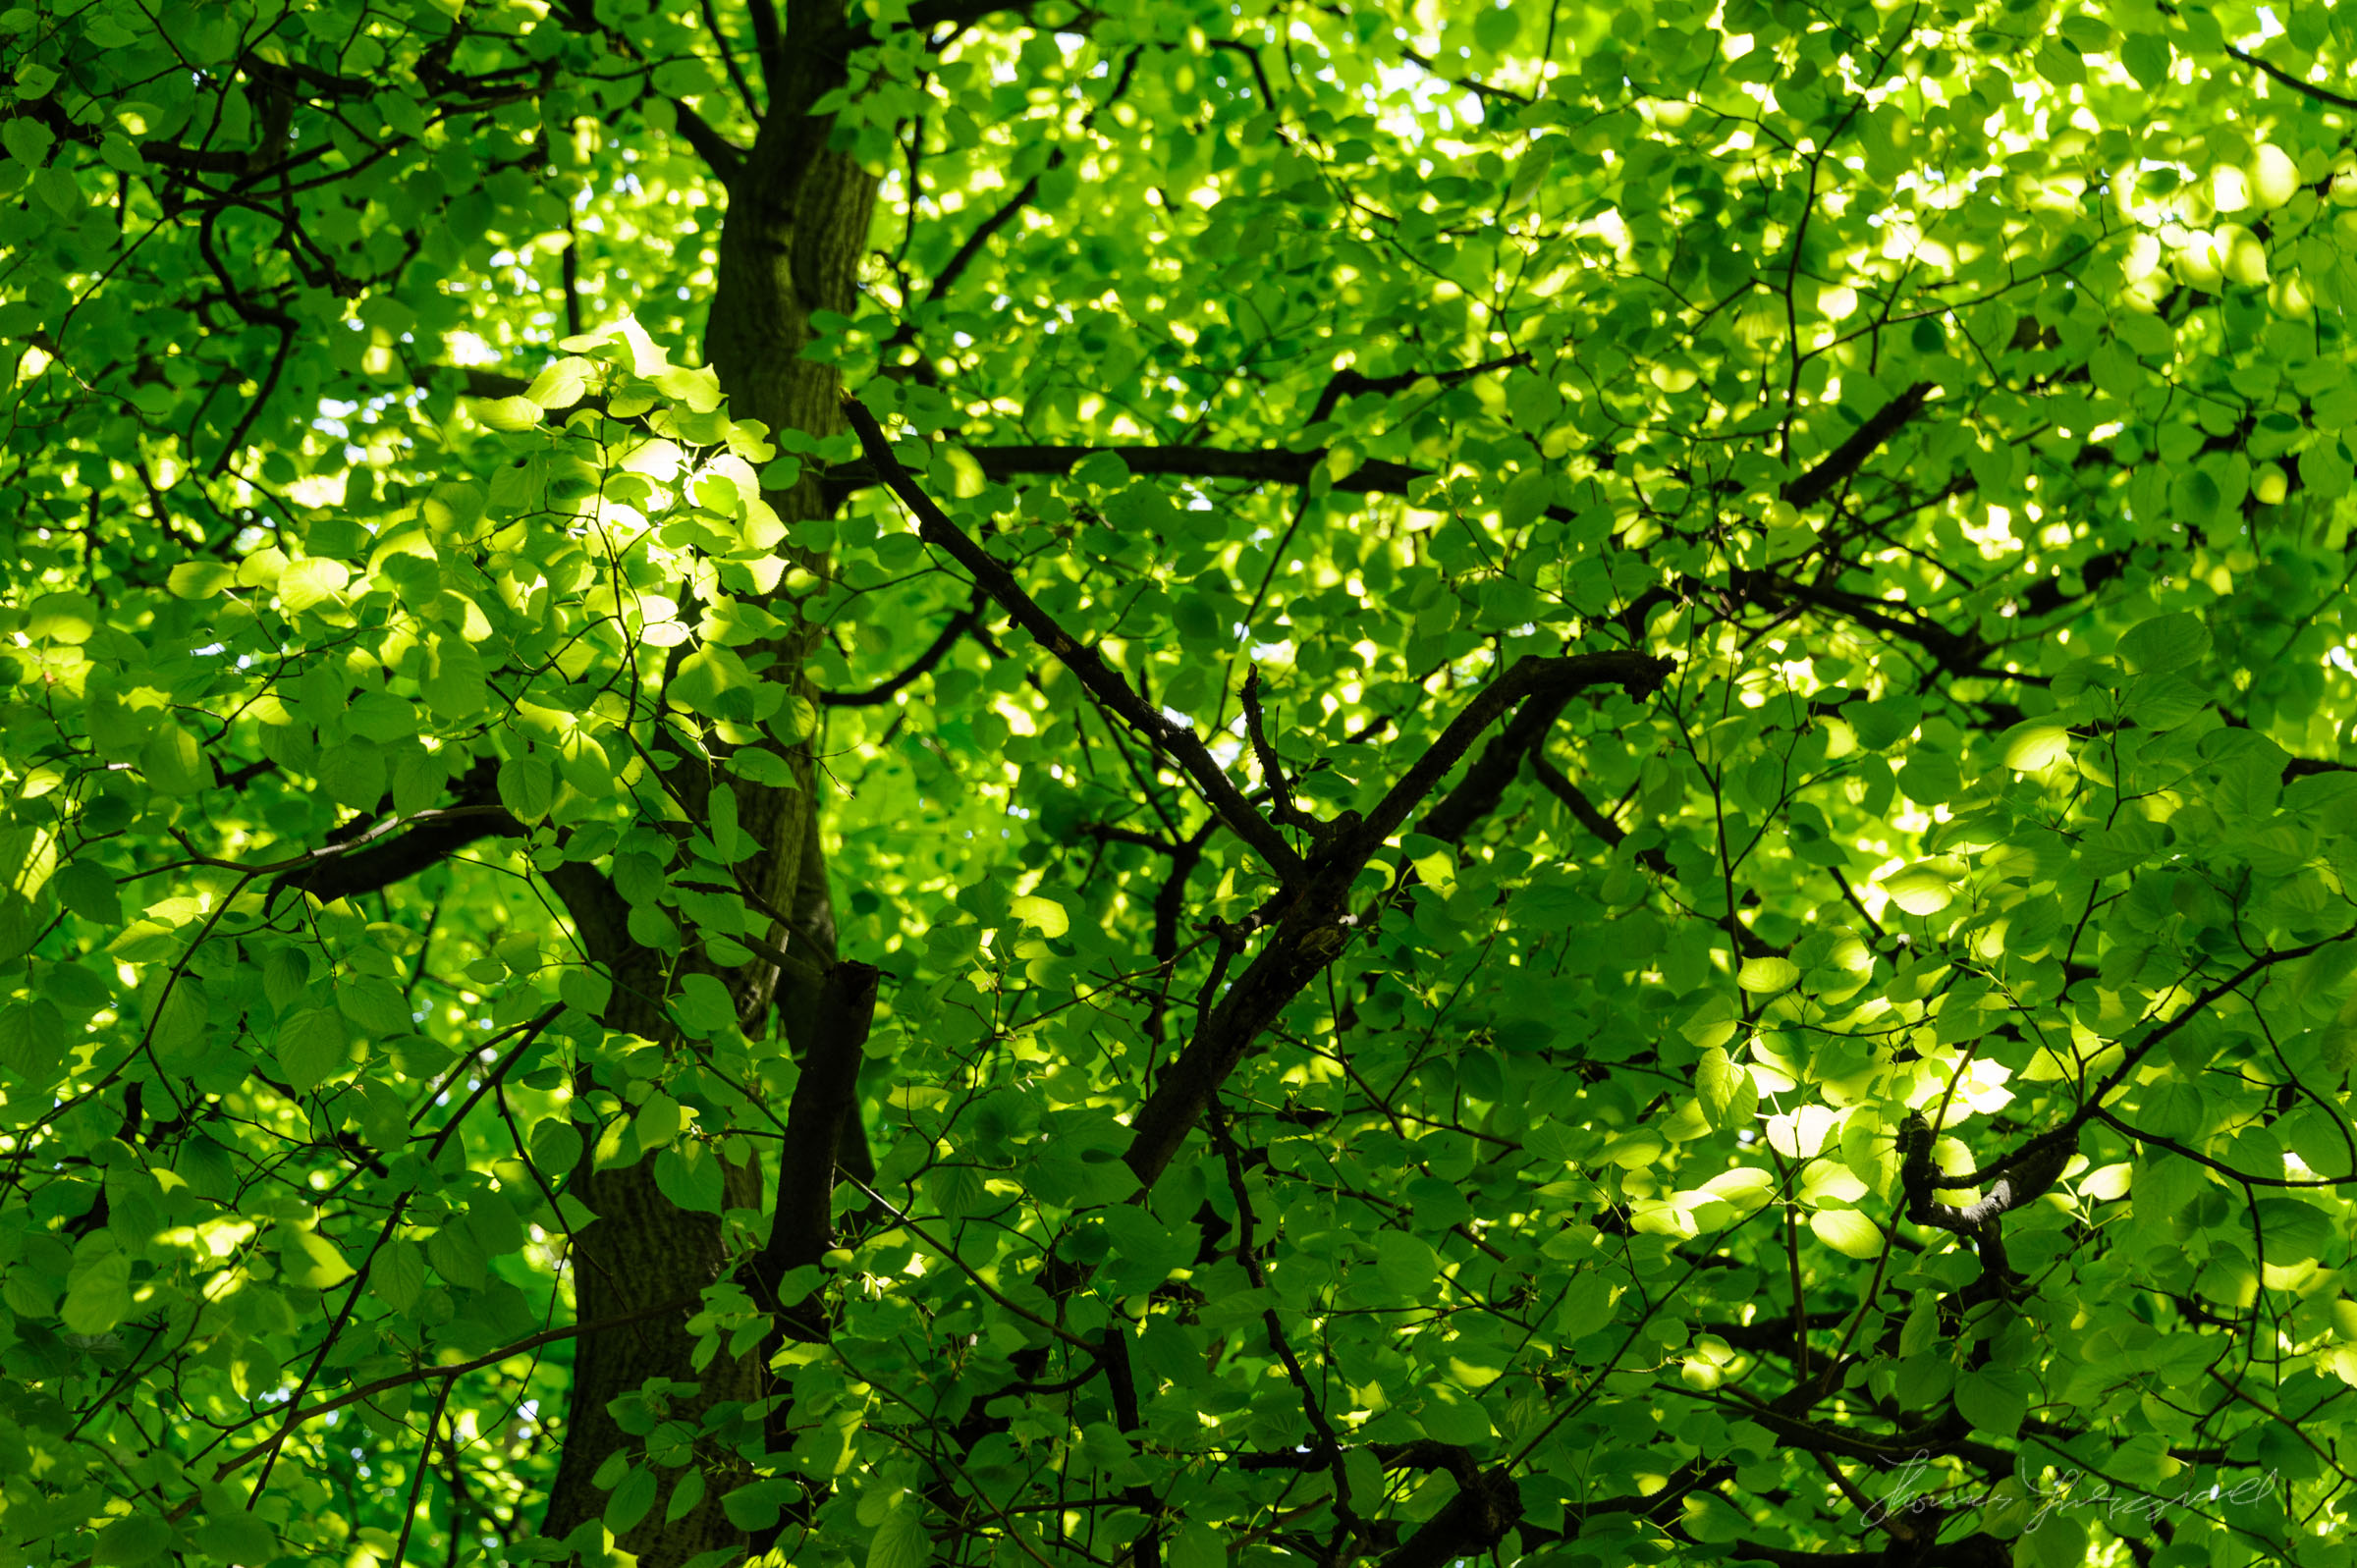 Patterns of Light and Green